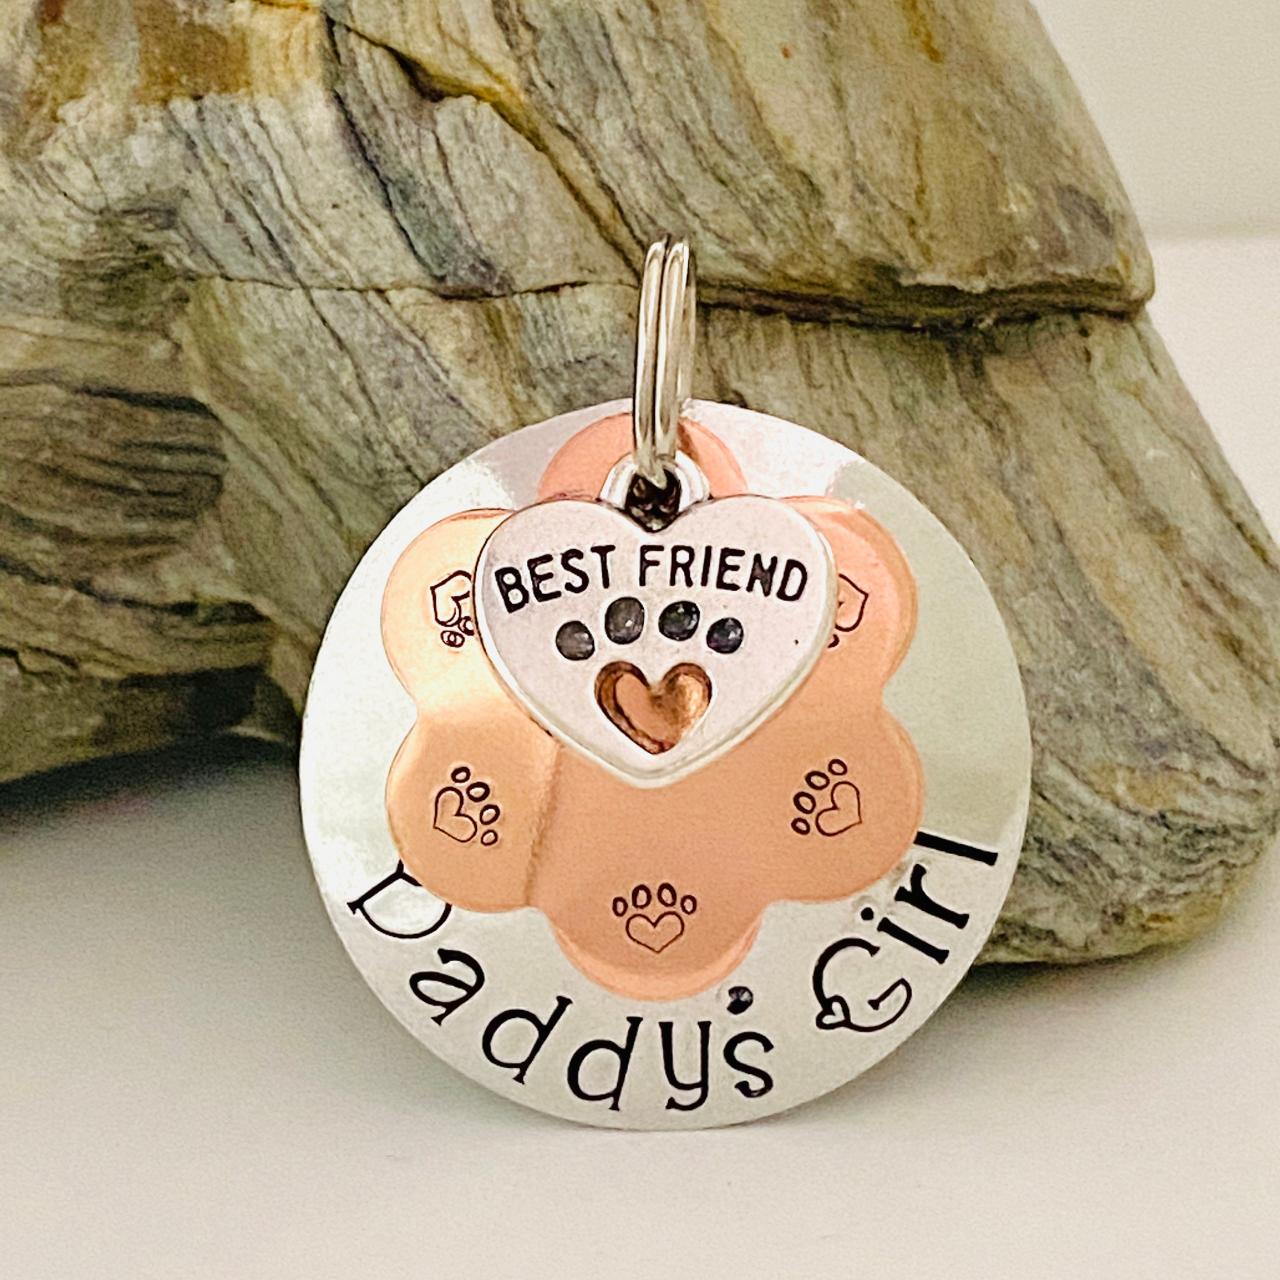 Dog Tag For Dogs, Dog Name Tag, Dog Id Tag, Dog Collar Tag, Pet Id Tag, Puppy Dog Tag, Strong Dog Tag, Unique Pet Tags, Round Dog Tag..